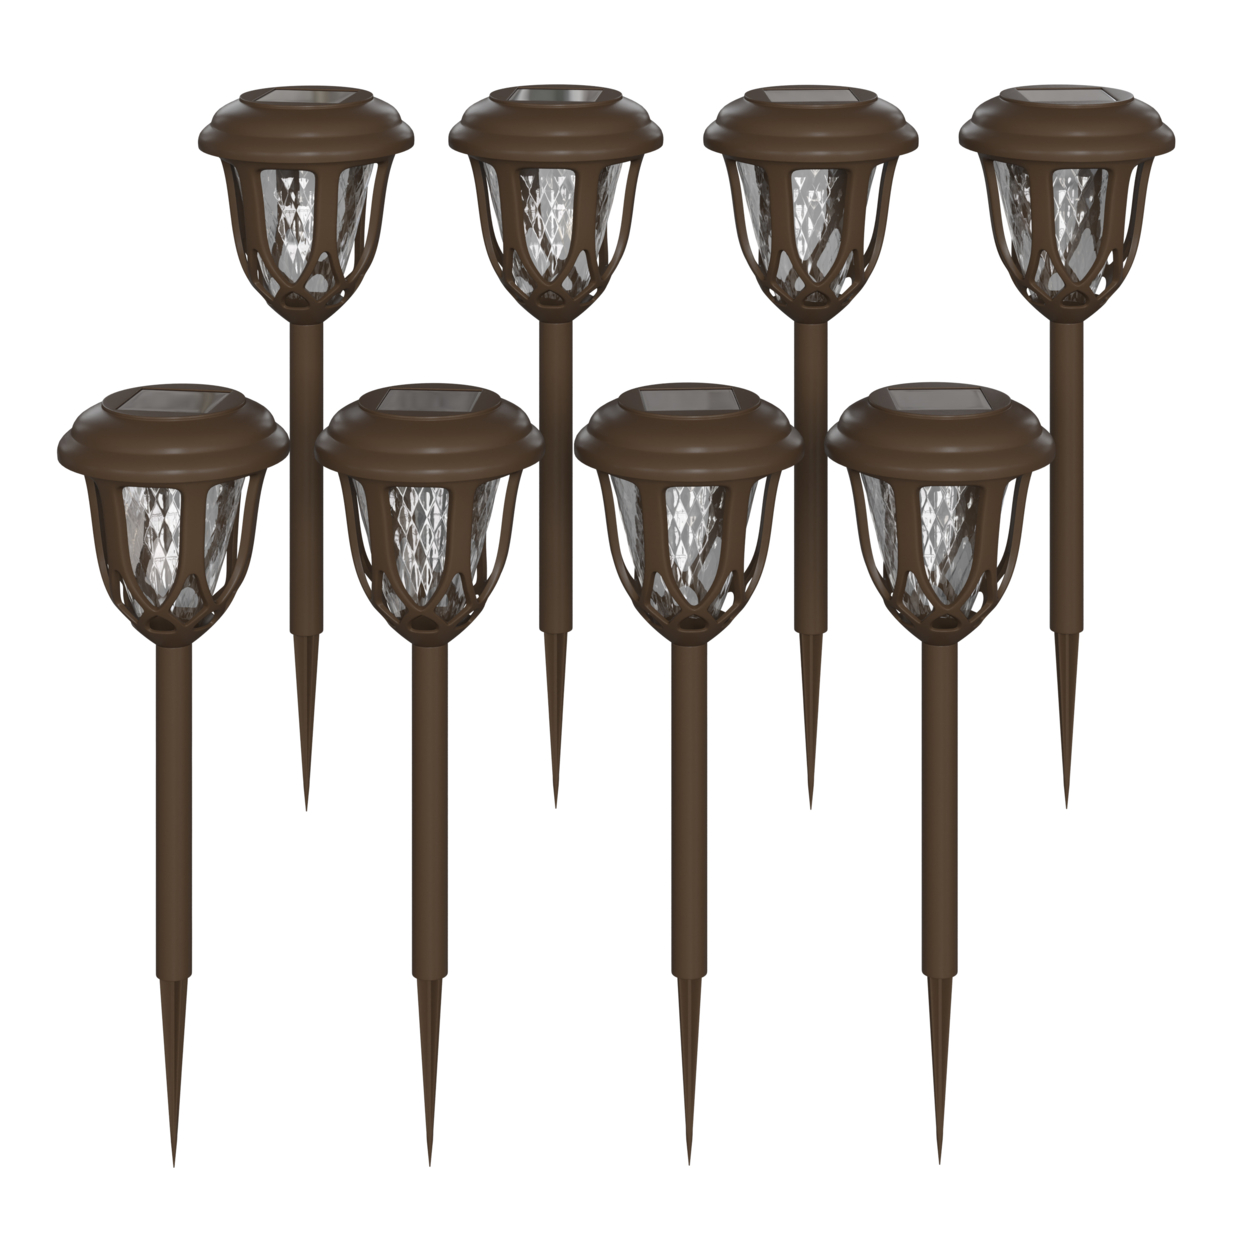 8 Pack Brown Tulip Design LED Solar Lights Weather Resistant Outdoor Solar Powered Lights For Pathway, Garden, & Yard